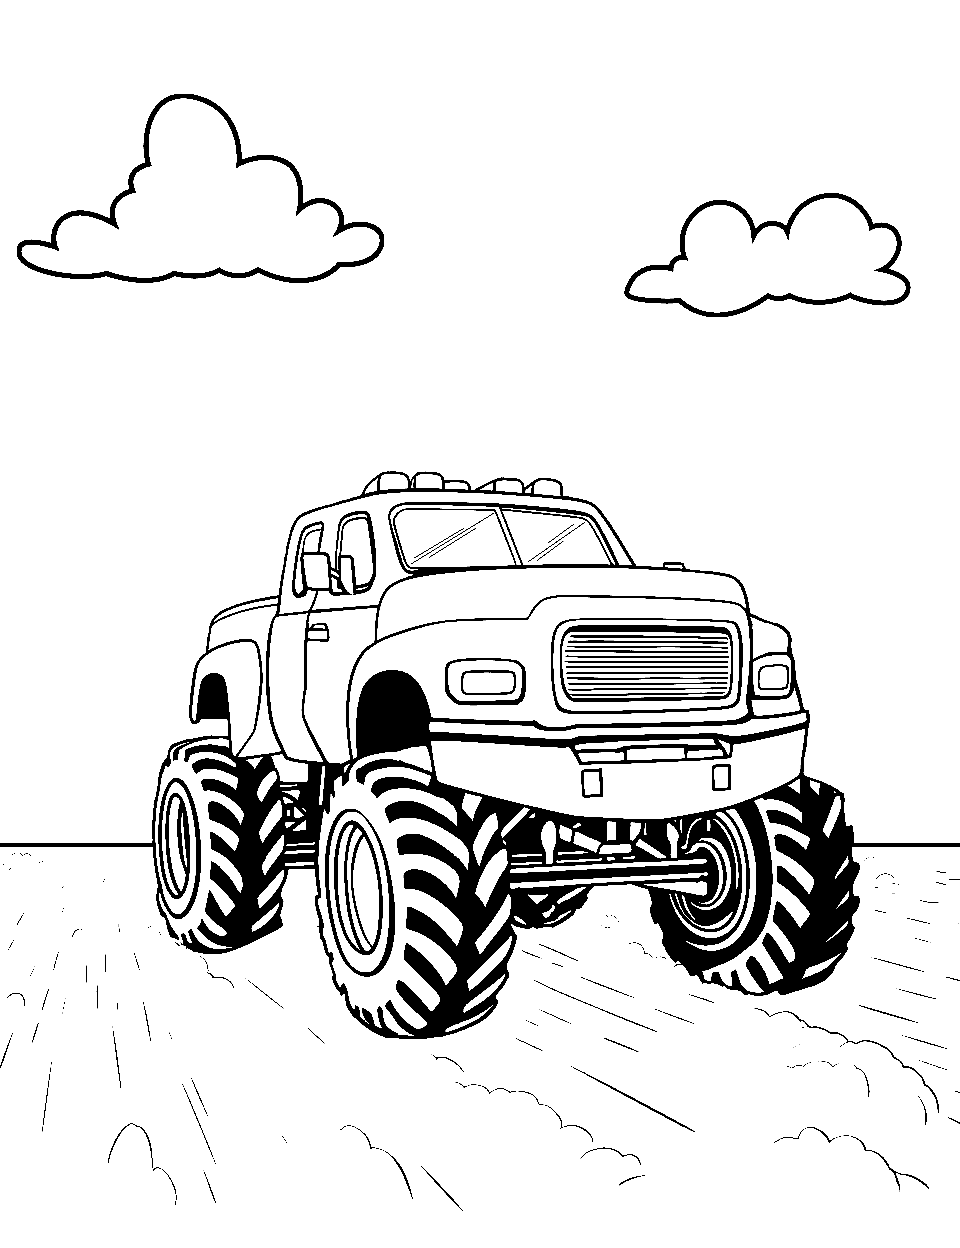 Large Monster Truck Race Car Coloring Page - A gigantic monster truck with oversized tires.